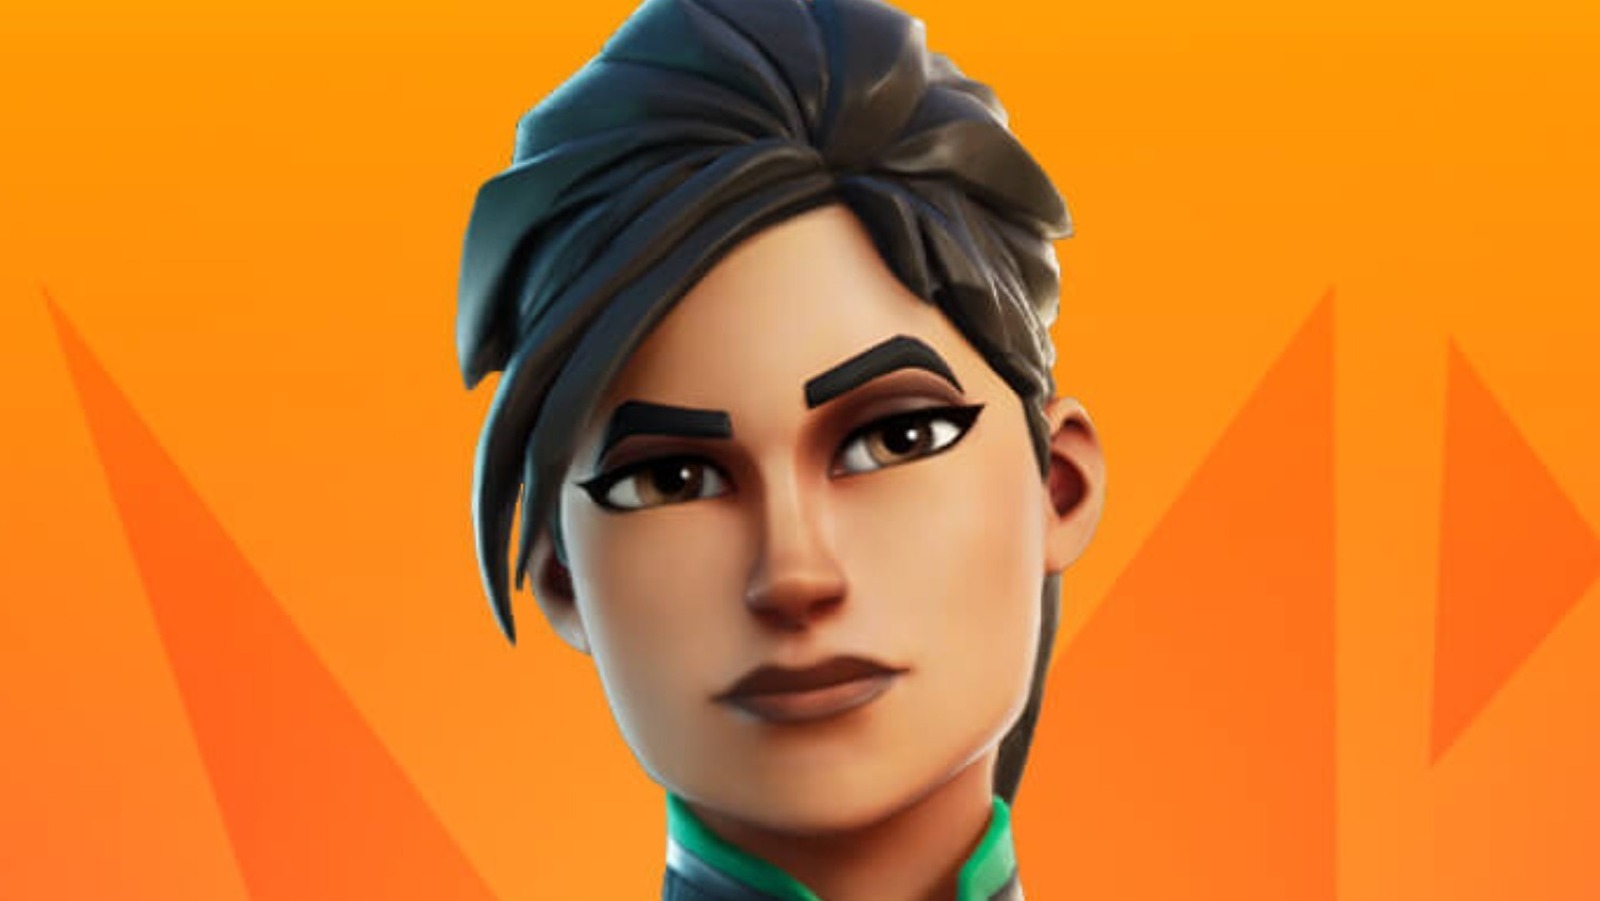 The Real Reason Pros Use Female Character Skins In Fortnite - SVG.